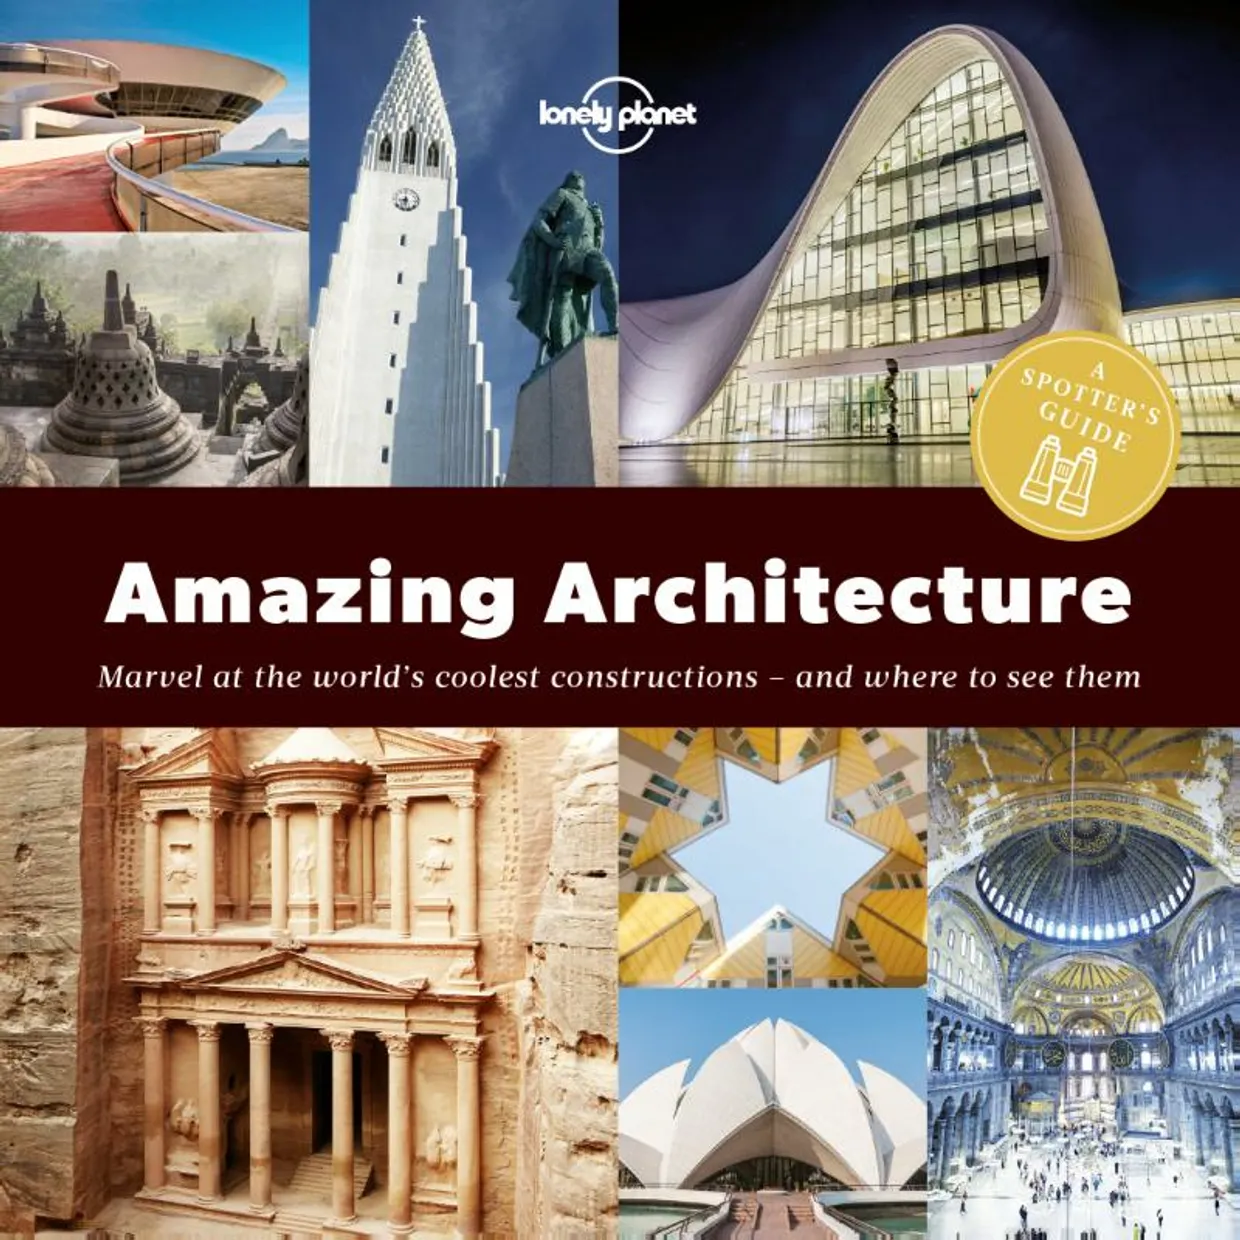 A Spotter's Guide to Amazing Architecture